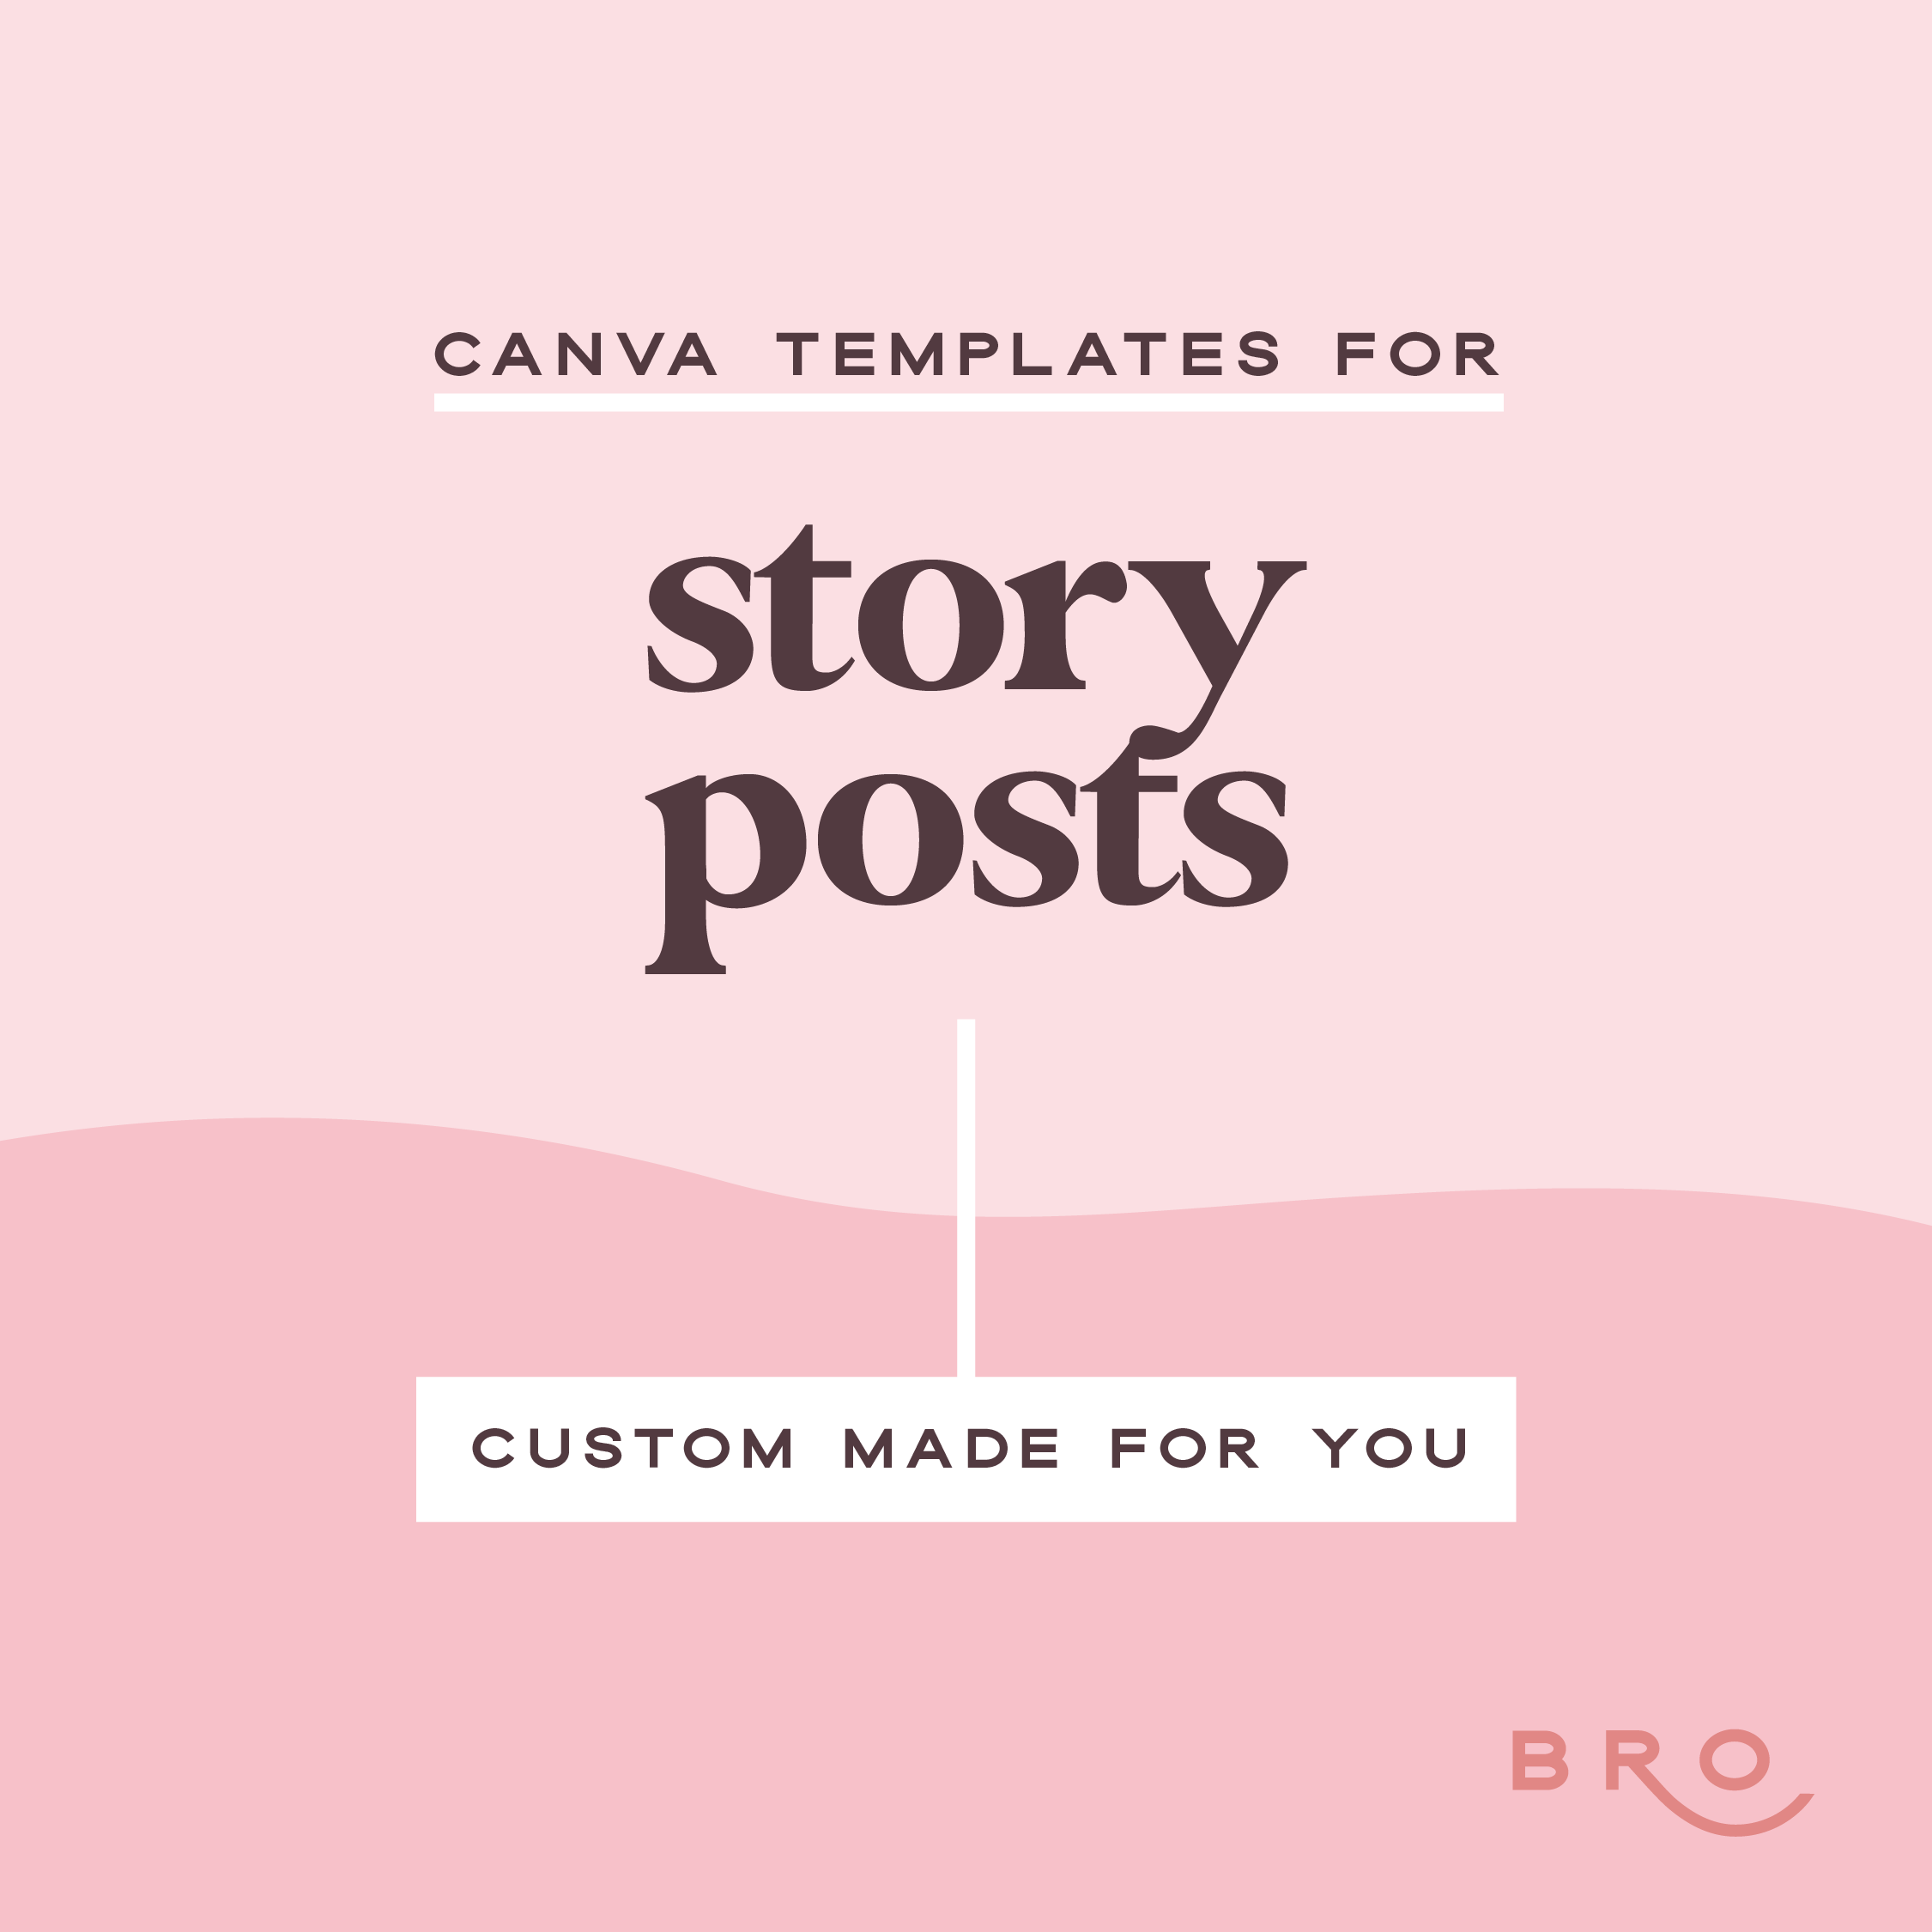 Story Canva templates: Customised for your business